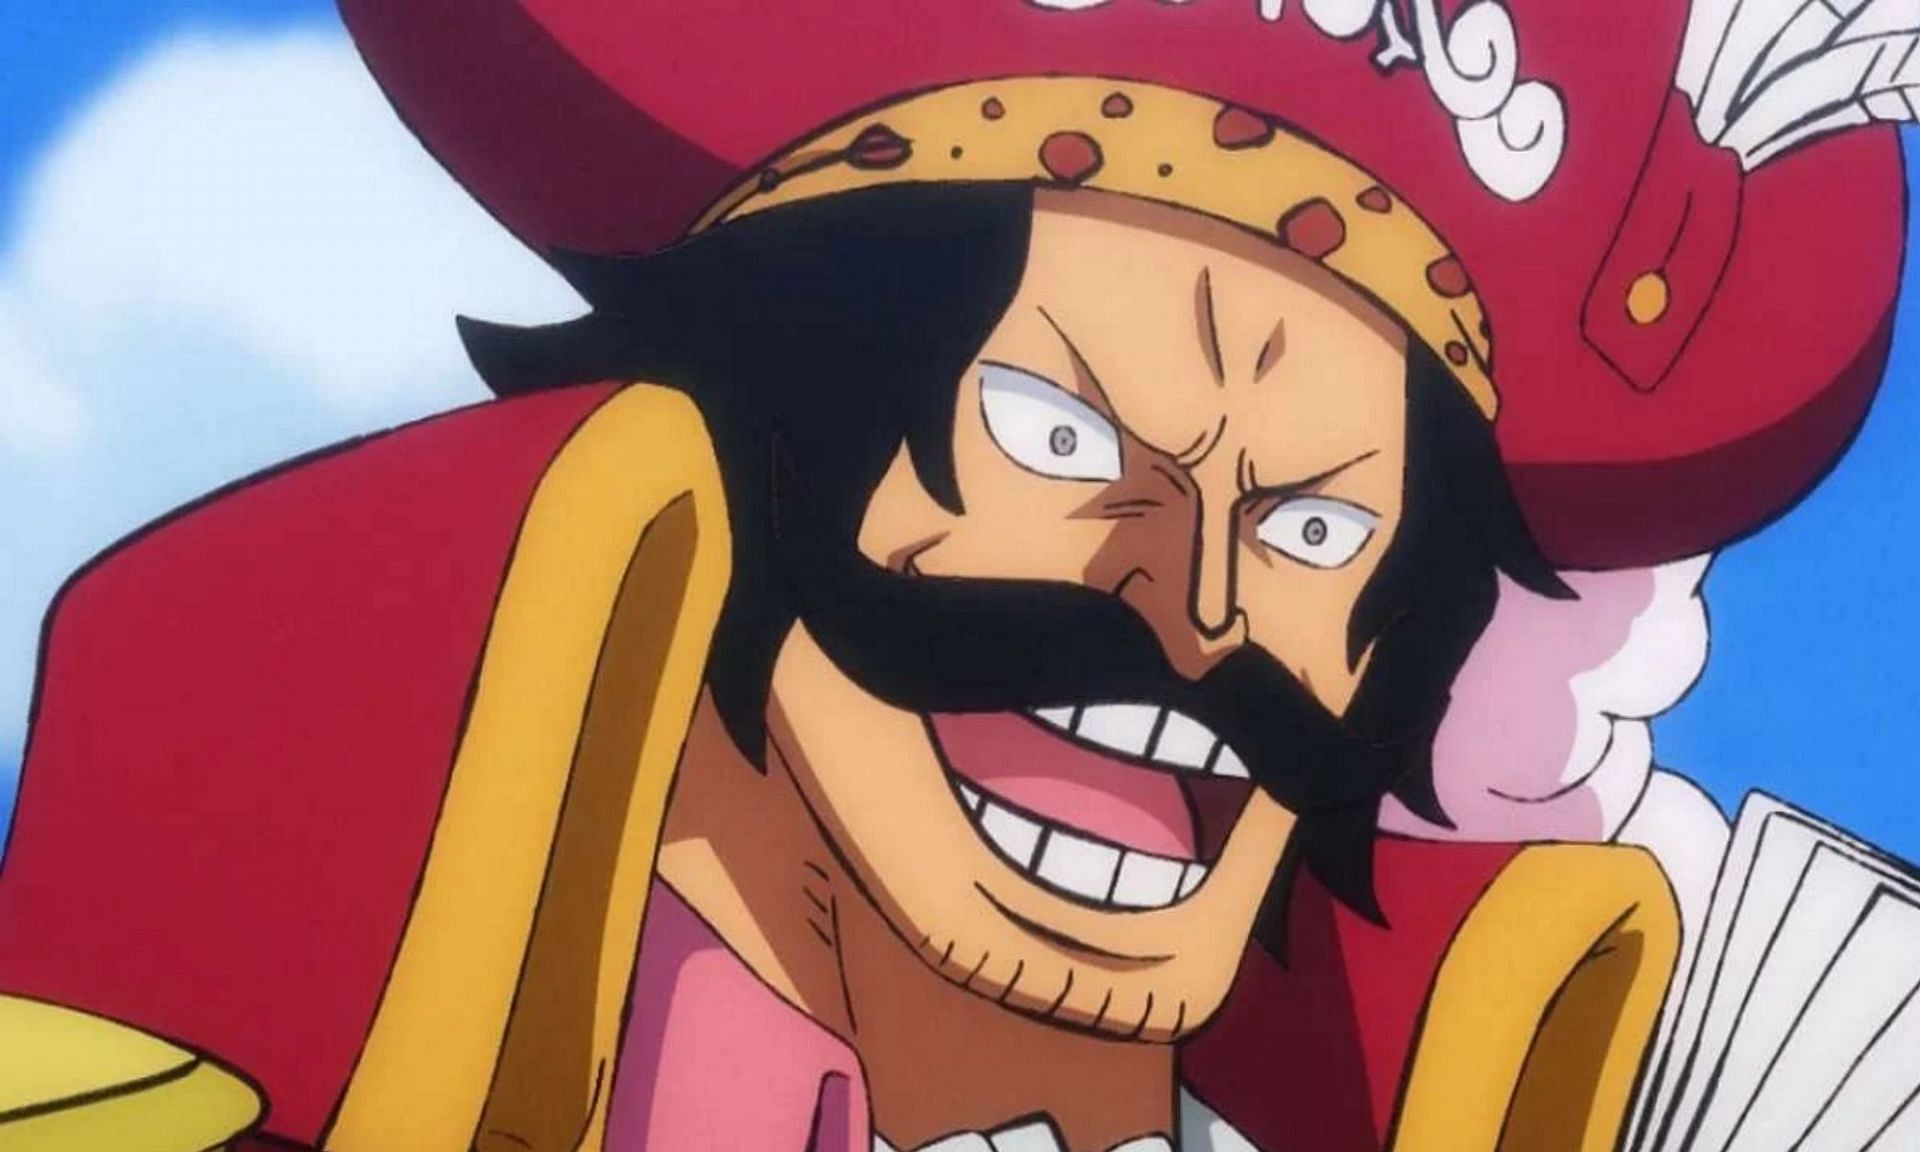 Who attended Roger's execution in One Piece?